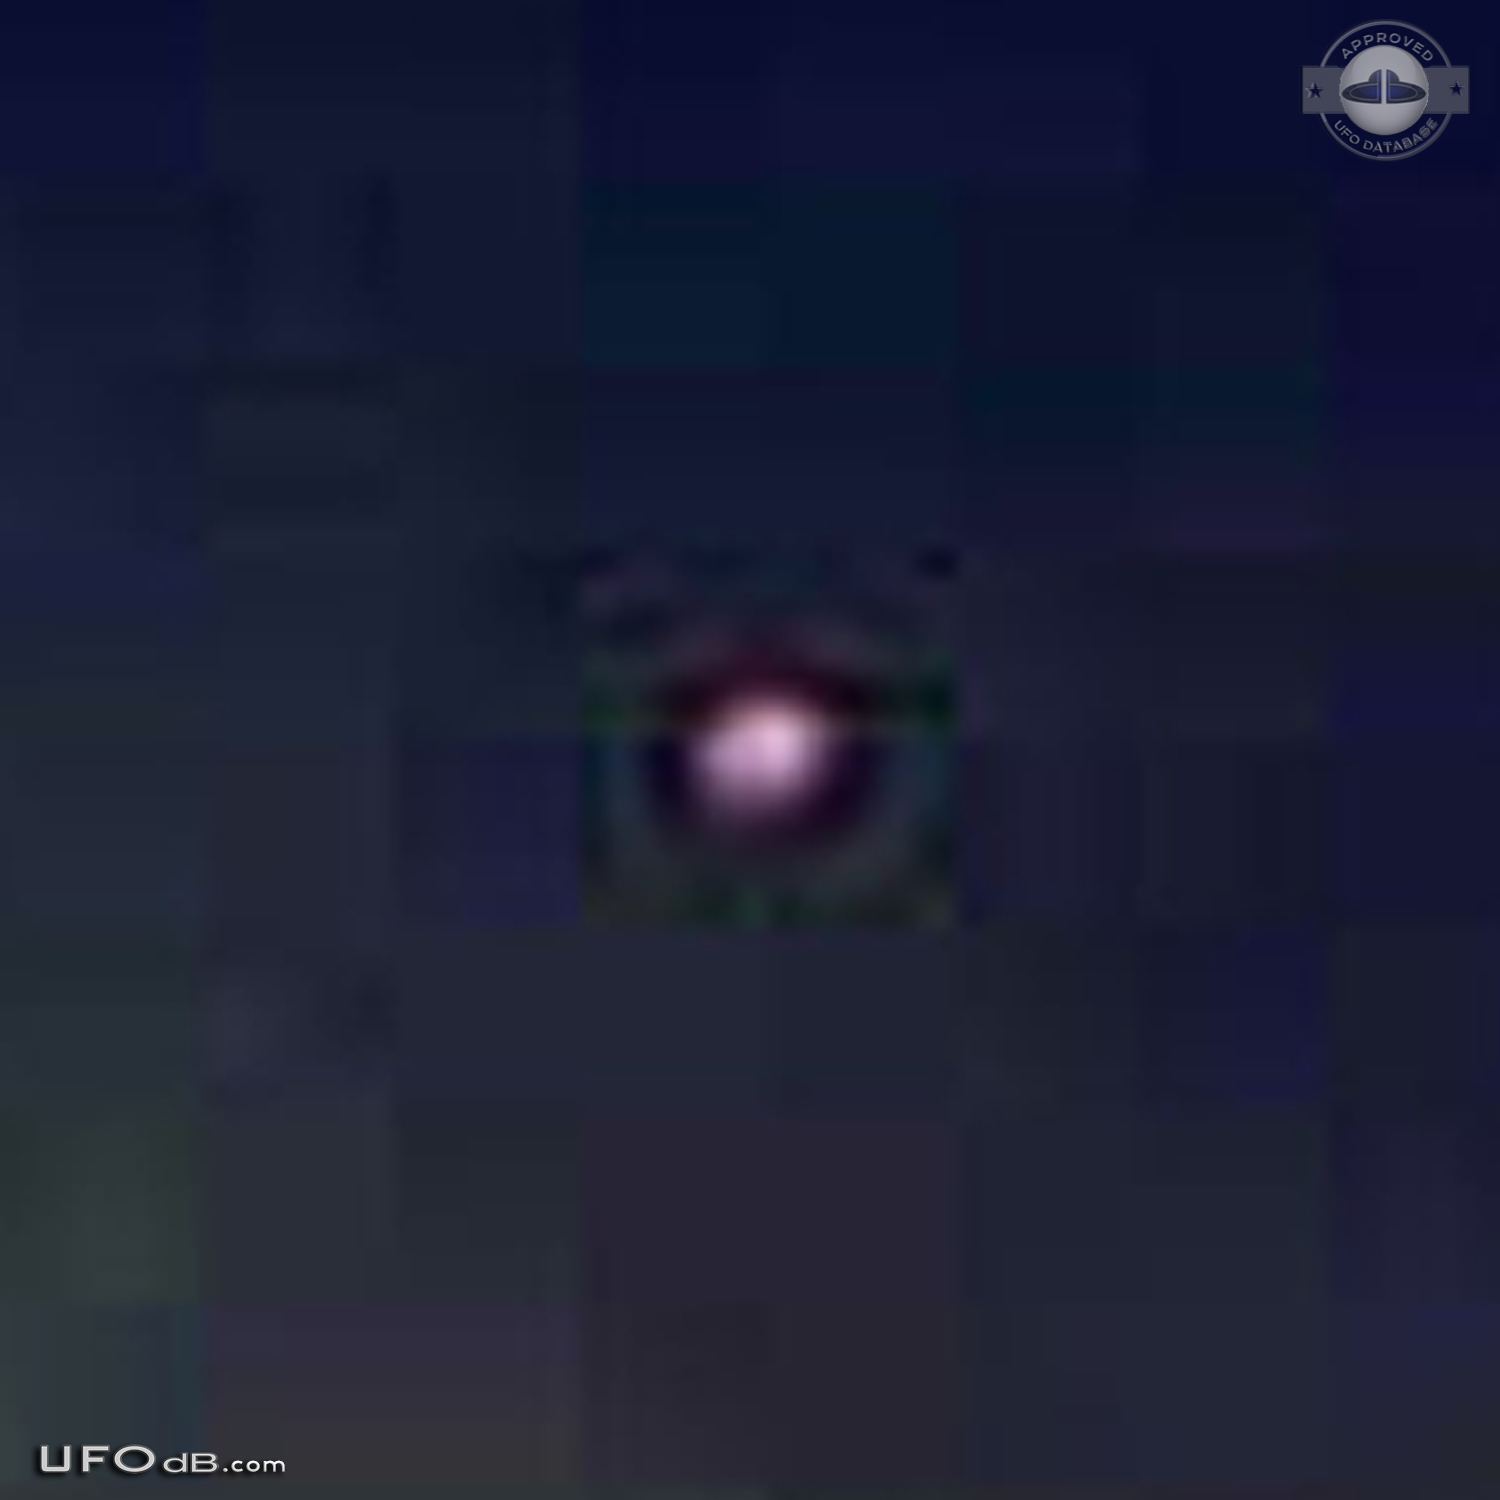 Blimb shaped UFO caught on picture over Zaragoza in Spain in May 1974 UFO Picture #458-4